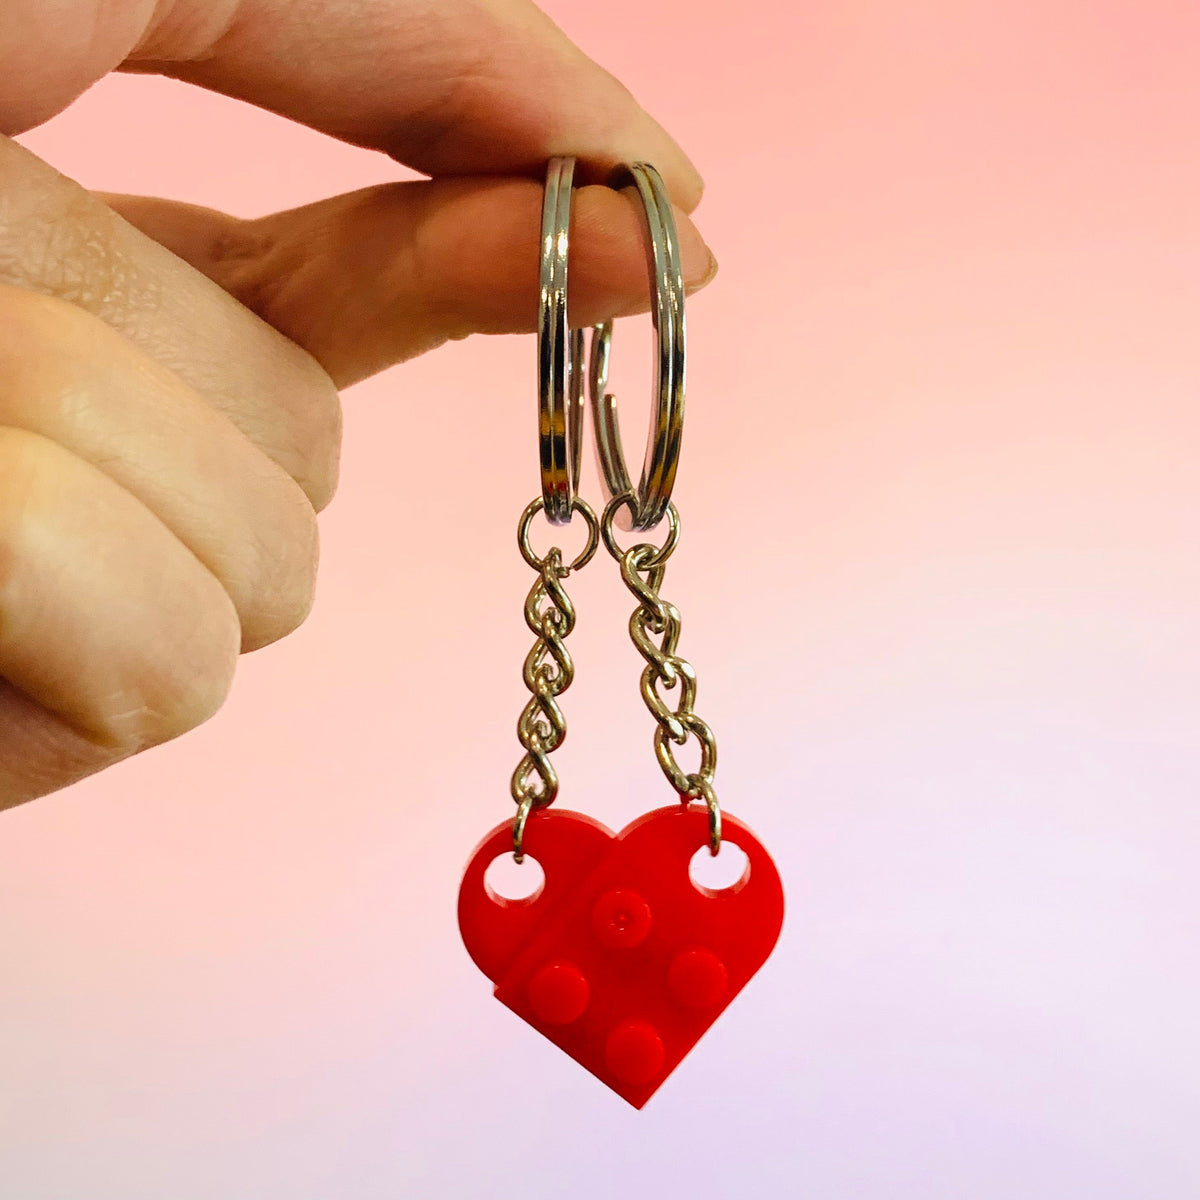 Brick Heart Matching Keychains Manufactured Overseas Red 